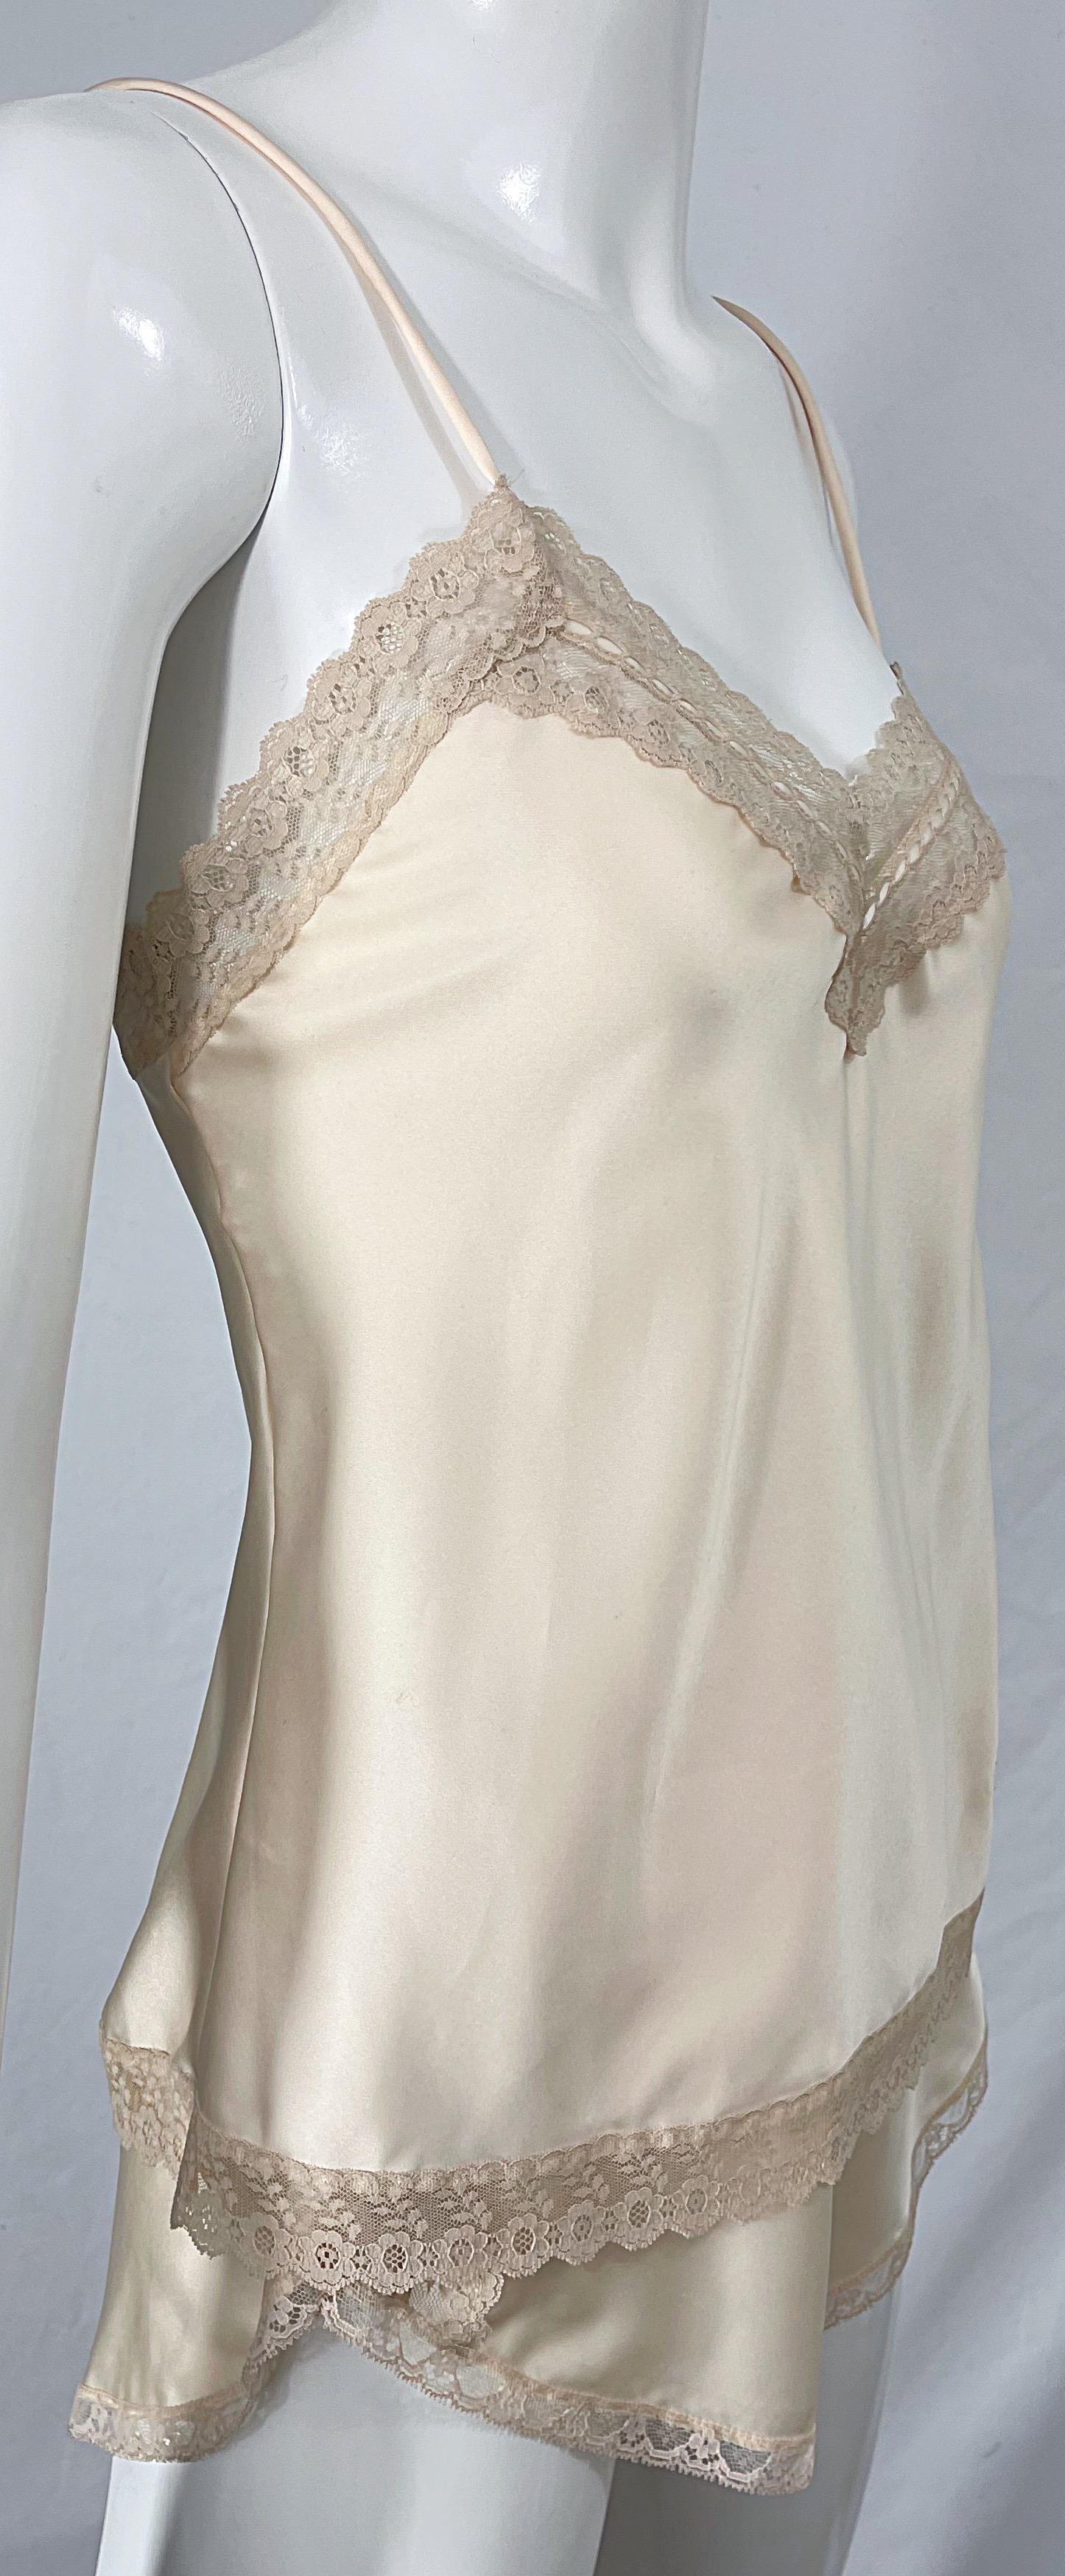 NWT 1980s Christian Dior Ivory Satin Lace Three Piece Cami 80s Lingerie PJ Set  For Sale 8